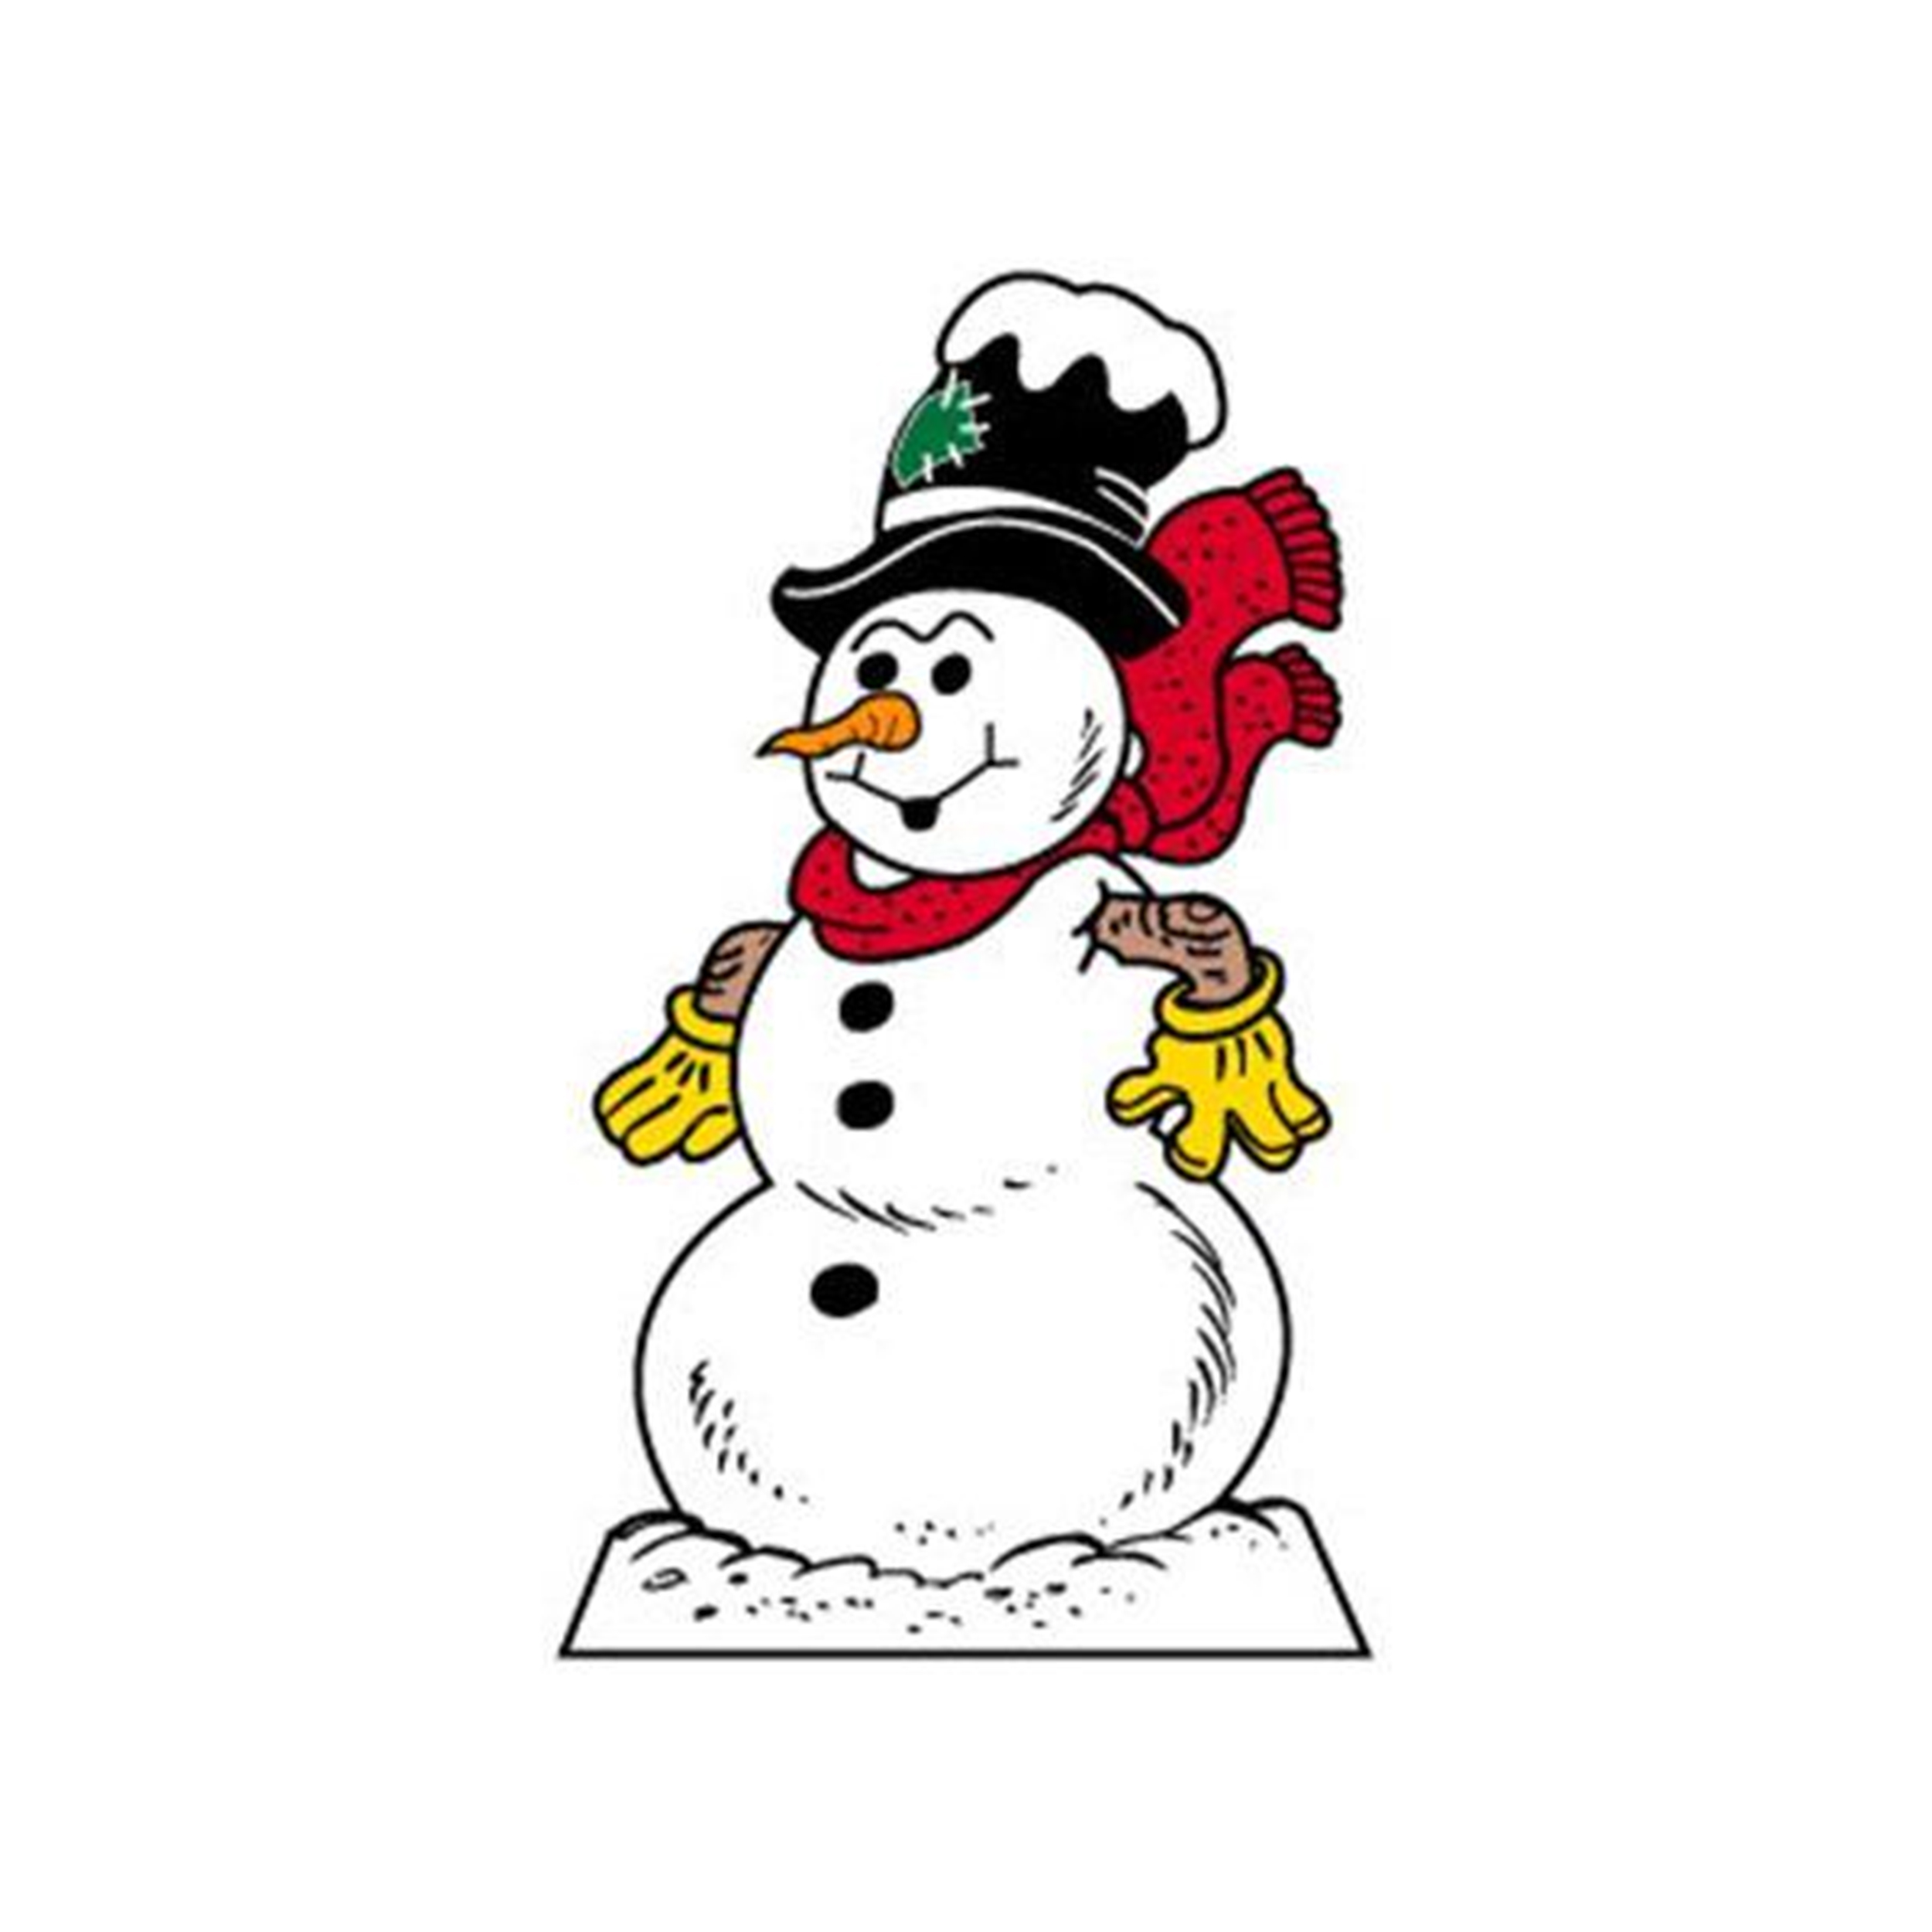 Woodworking Project Paper Plan To Build Large Snowman